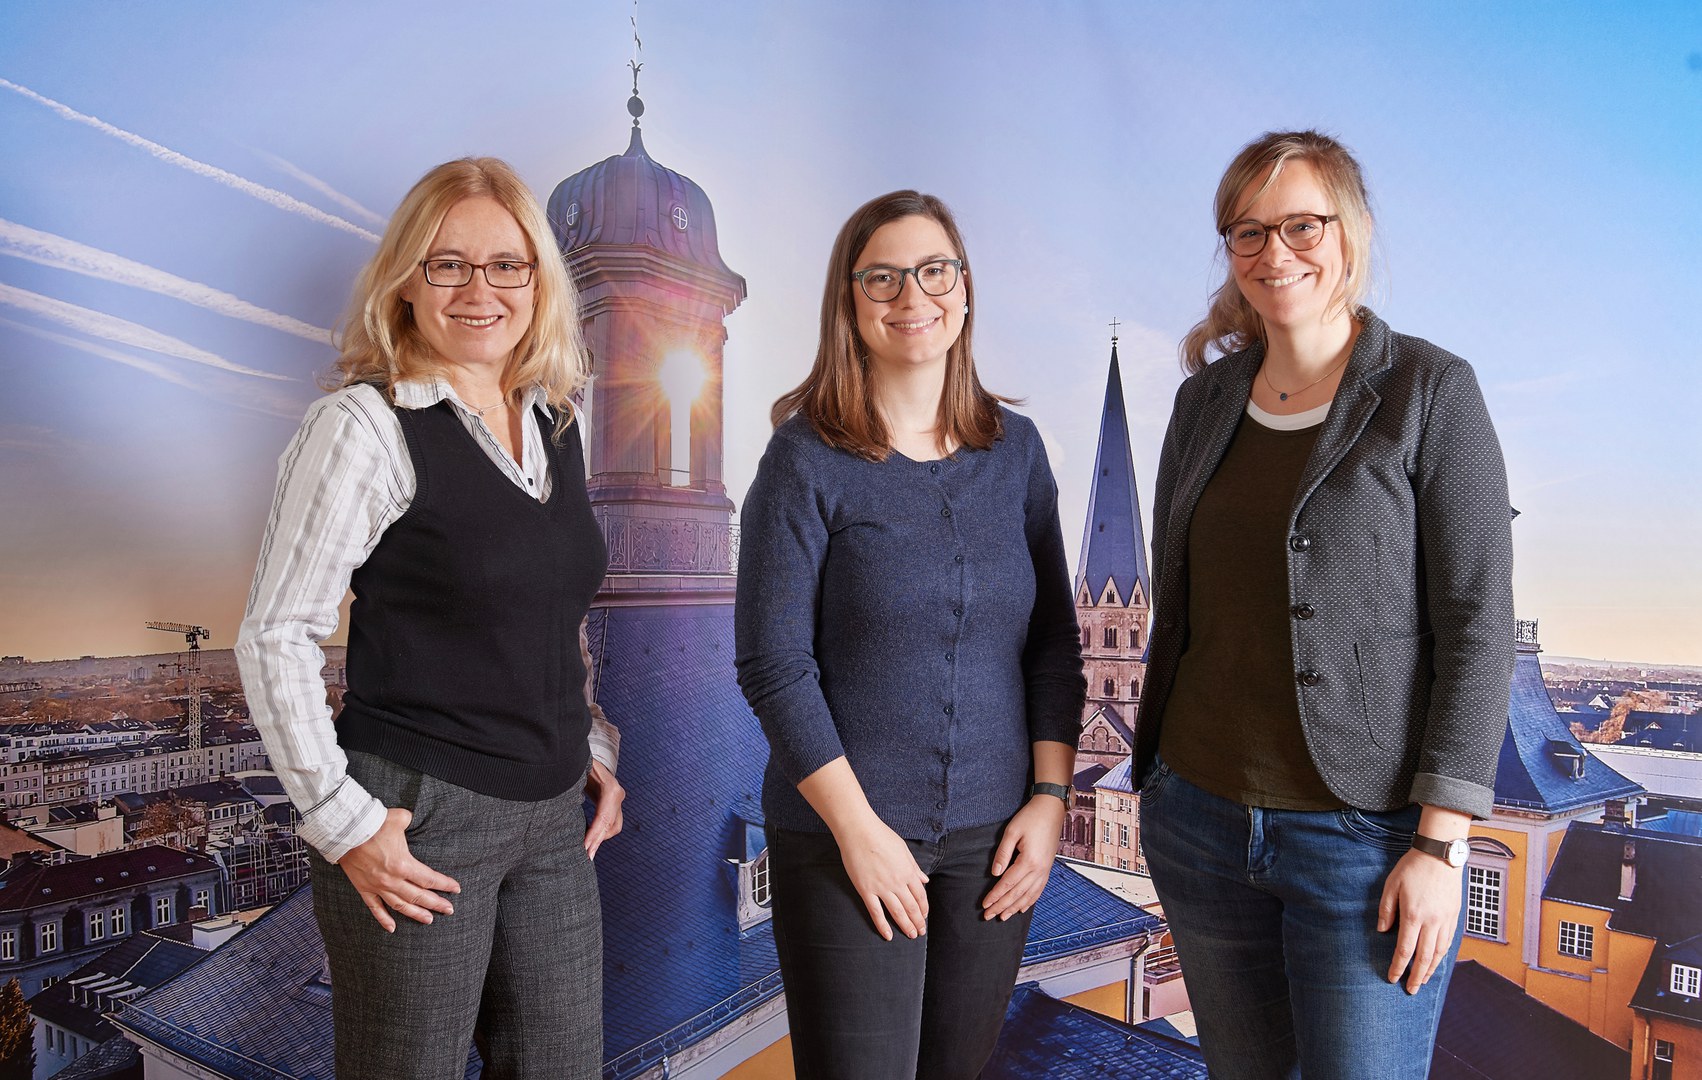 The psychologists from the Central Study Advisory and Counseling Service who have completed additional training in psychotherapy and who support students with anxiety: Claudia Kerp, Laura Neufeldt-Homolka, Anne Zilligen (PP)